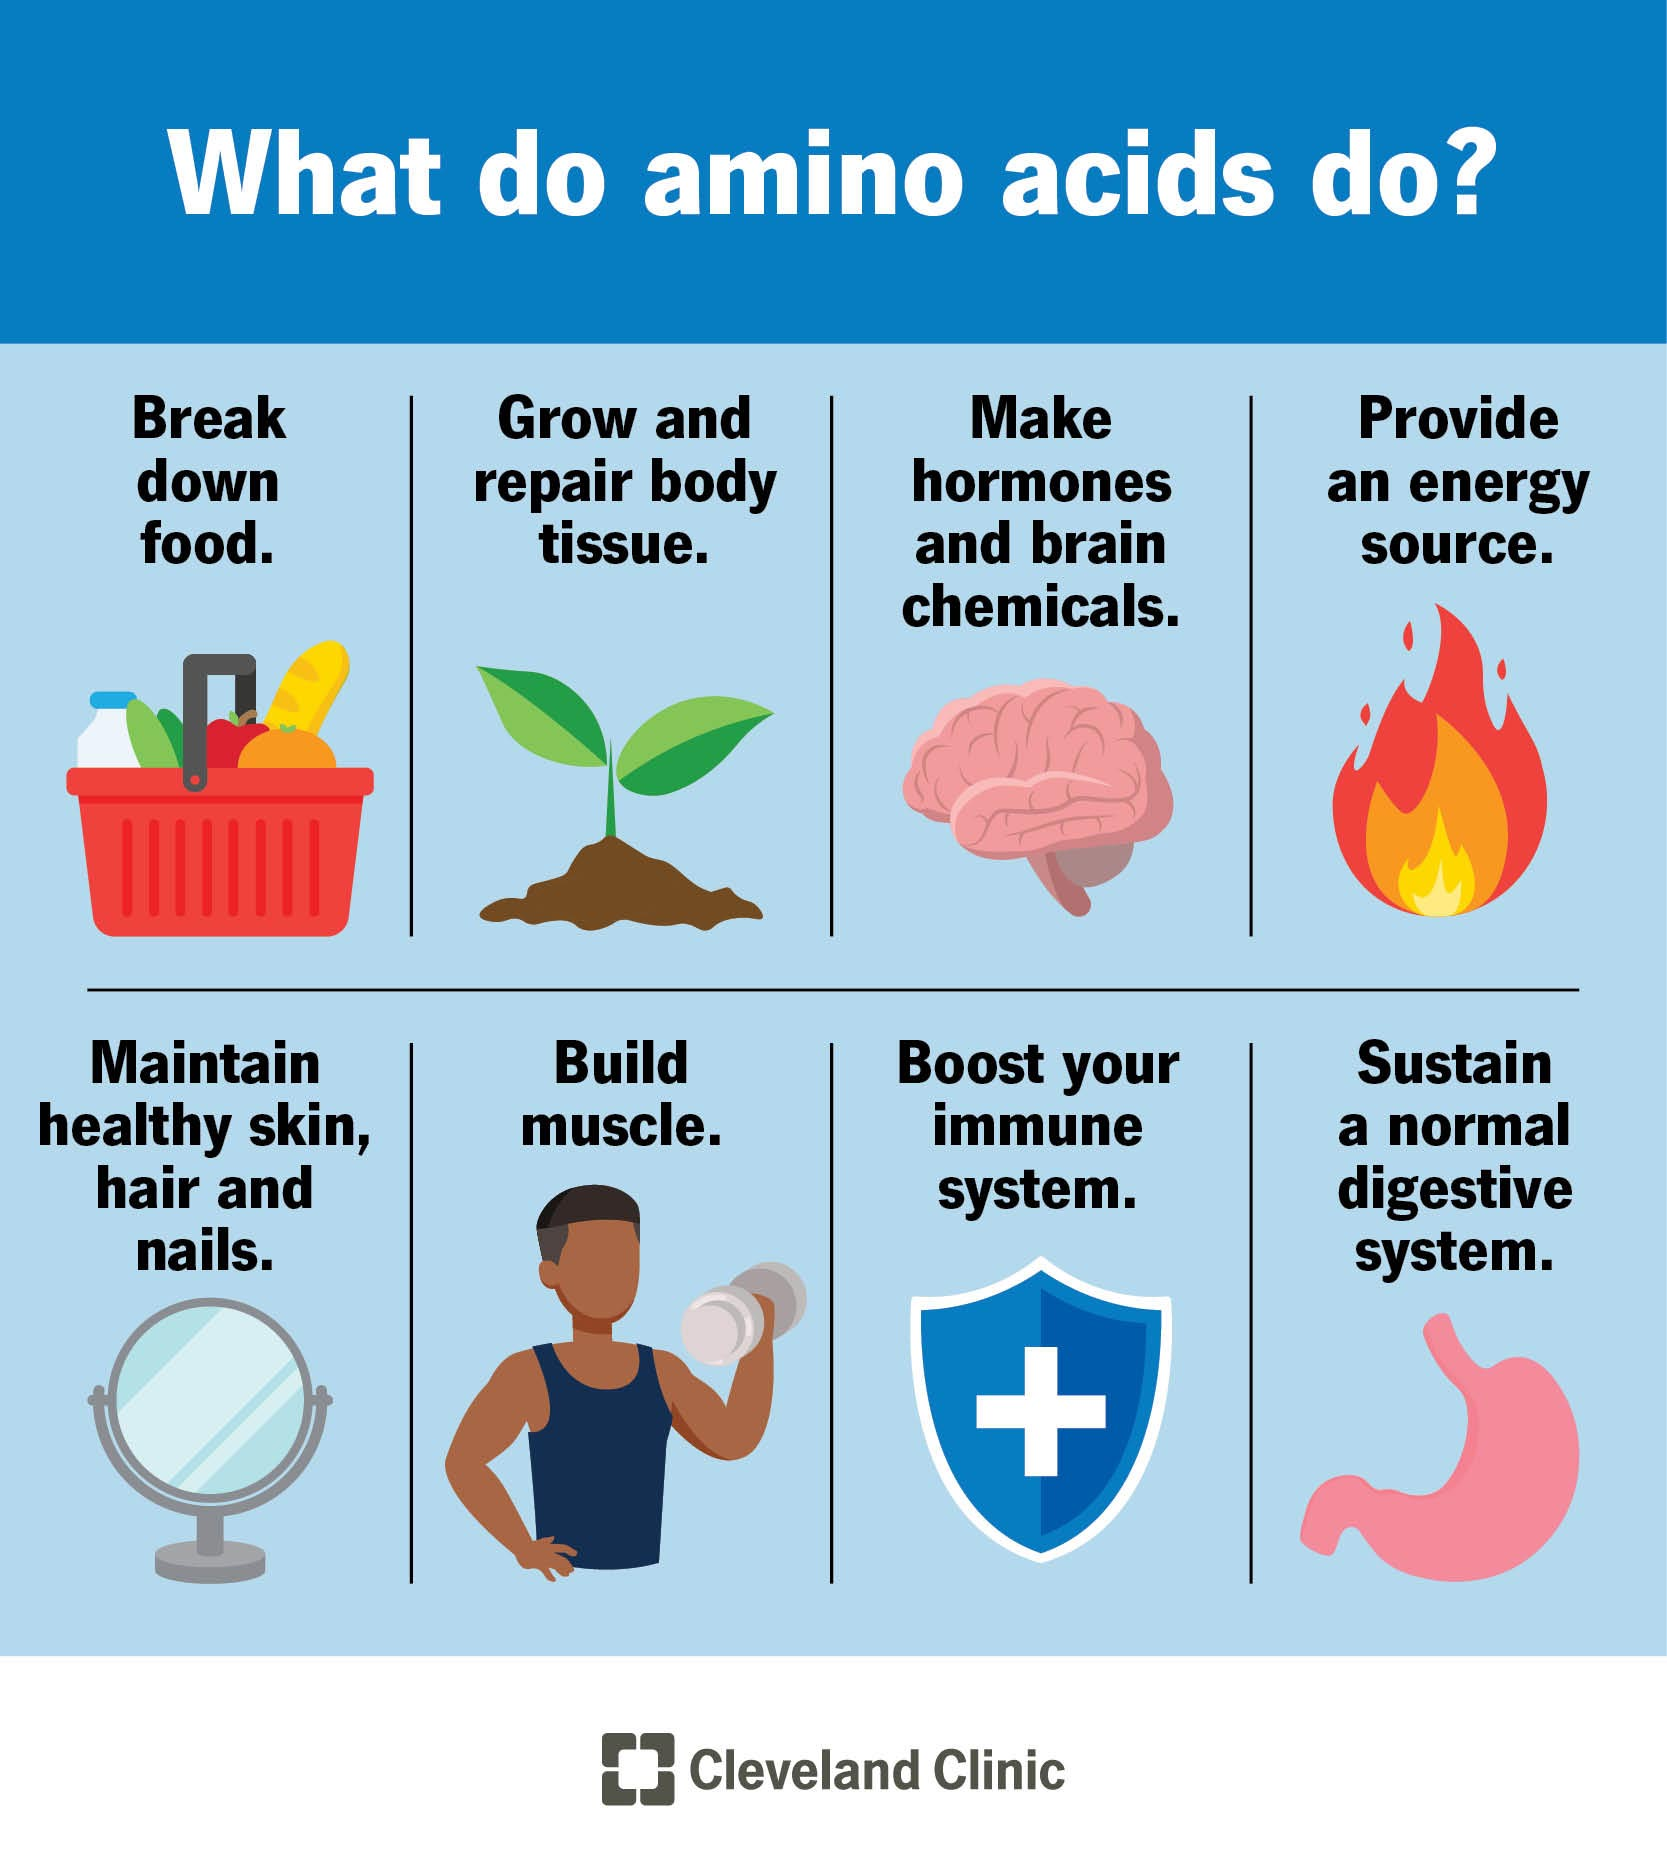 Amino acids are involved in many important roles in your body, including breaking down food, building muscle and boosting your immune system.